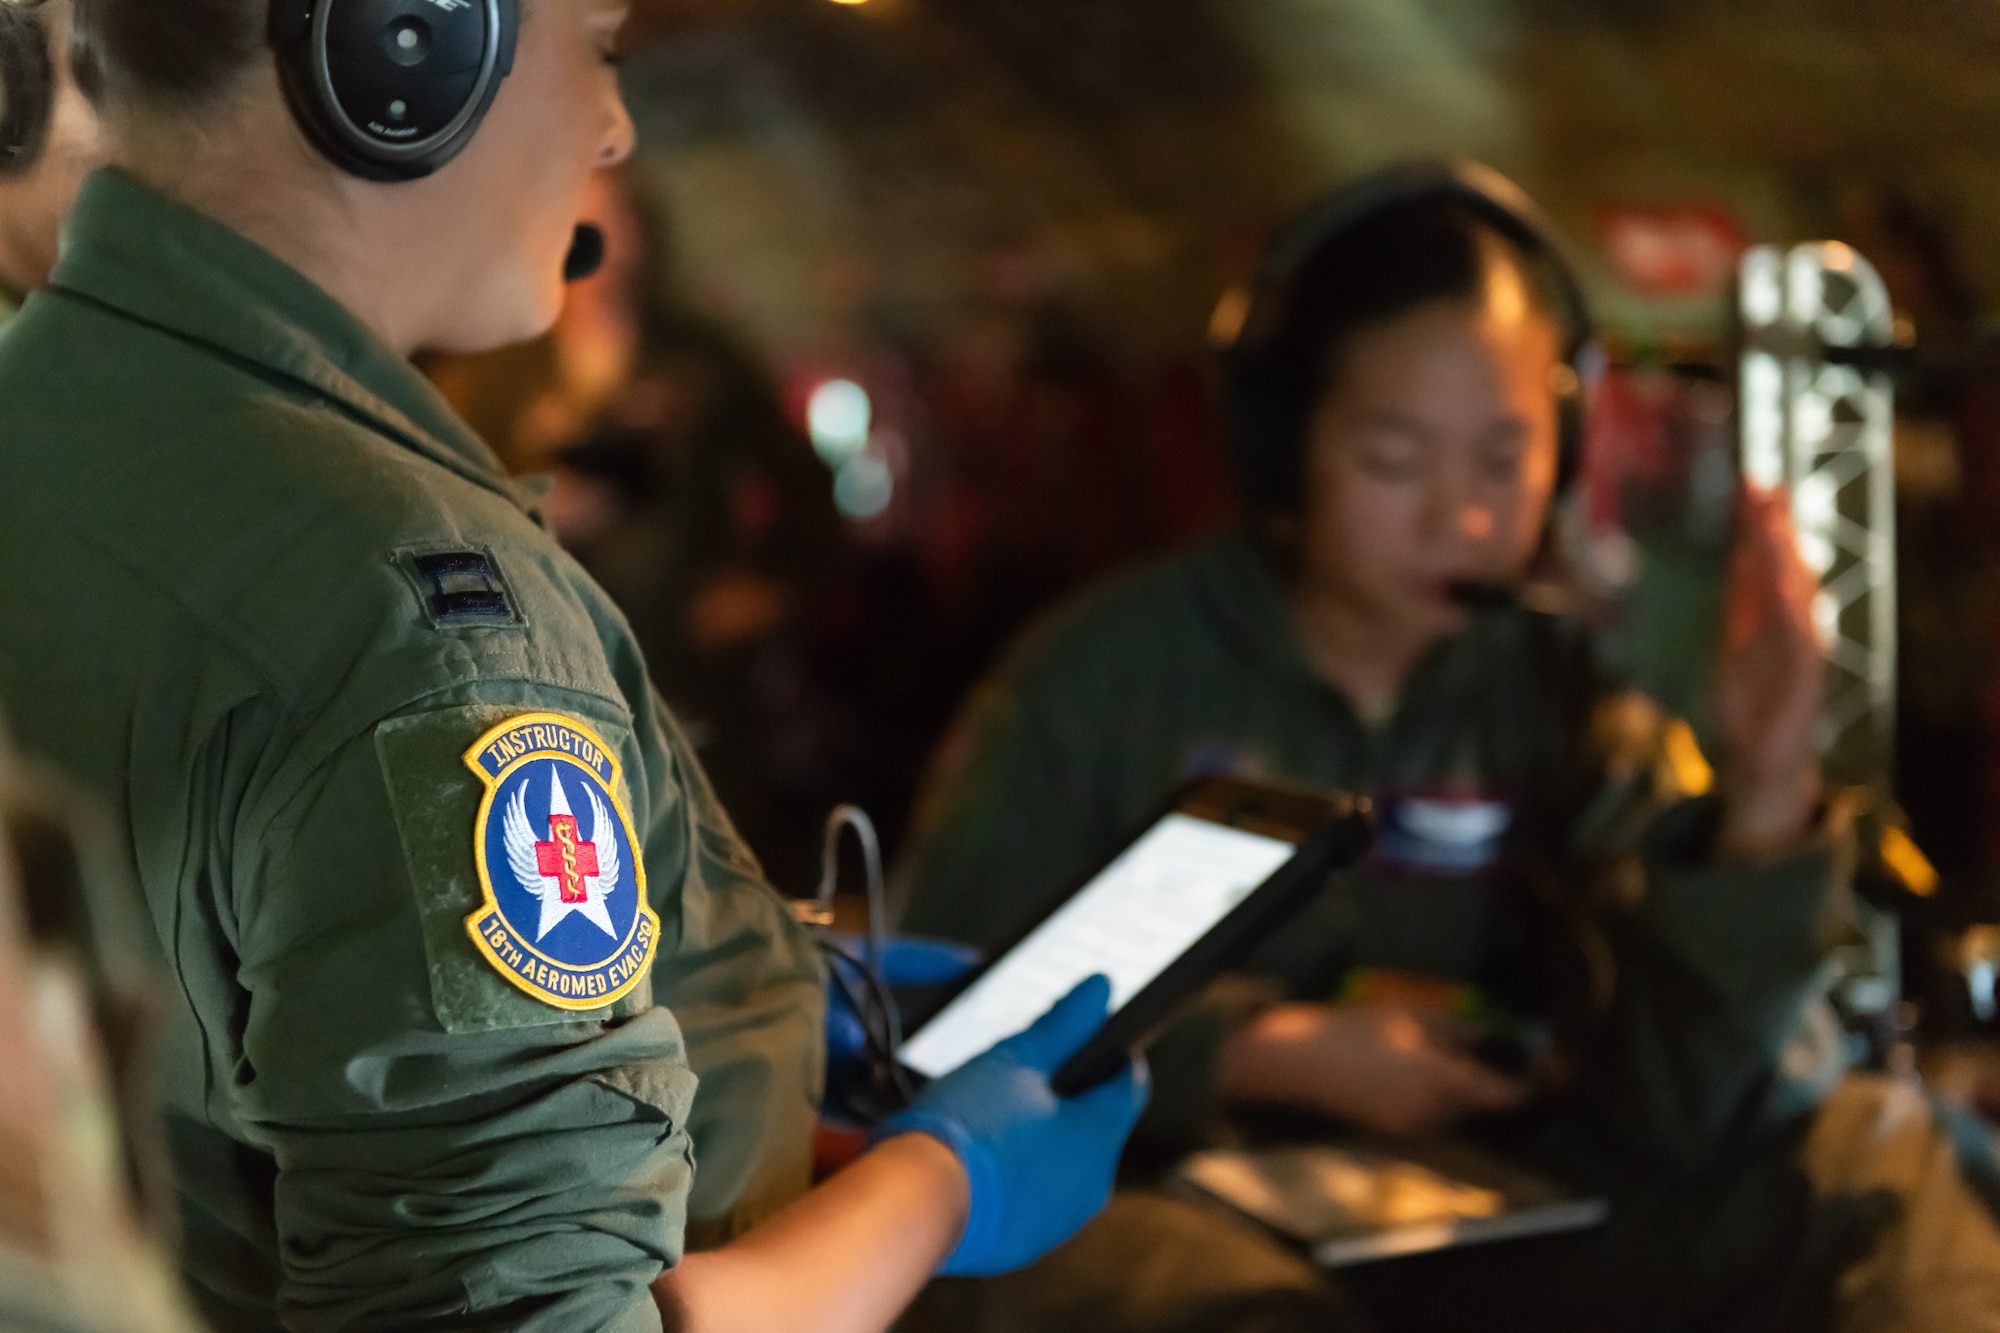 U.S. Air Force Capt. Lauren Kalani, 18th Aeromedical Evacuation Squadron flight nurse looks over her electronic flight book onboard a KC-135 Stratotanker during an exercise May 8th, 2019, out of Kadena Air Base, Japan. The 18th AES deploys and operates elements of a theatre aeromedical evacuation system capable of worldwide taskings. (U.S. Air Force photo by Airman 1st Class Matthew Seefeldt)